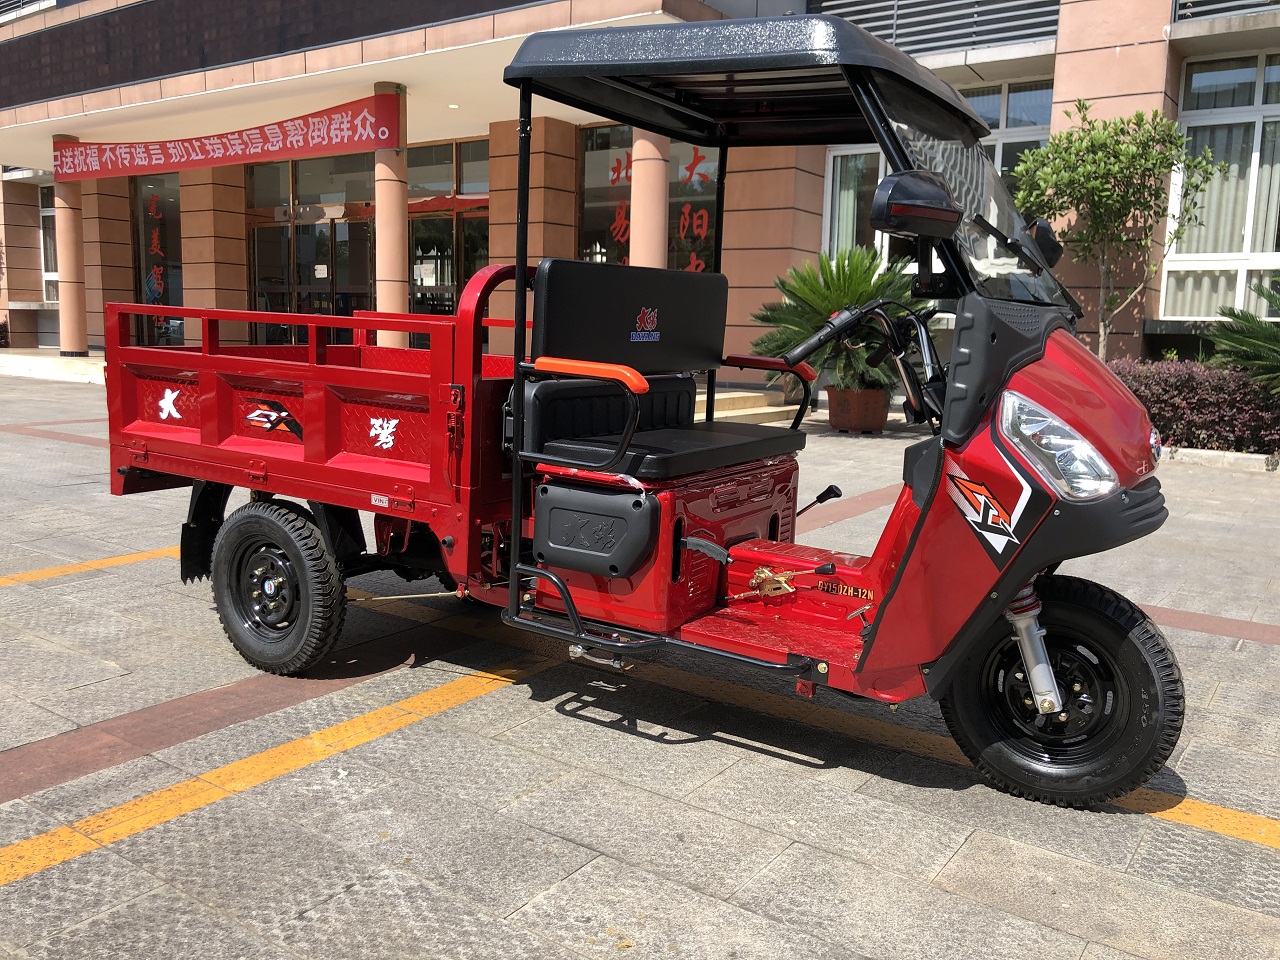 High quality 110cc air cooled engine used harga motor tricycle cargo petrol for adult power motorized tricycle